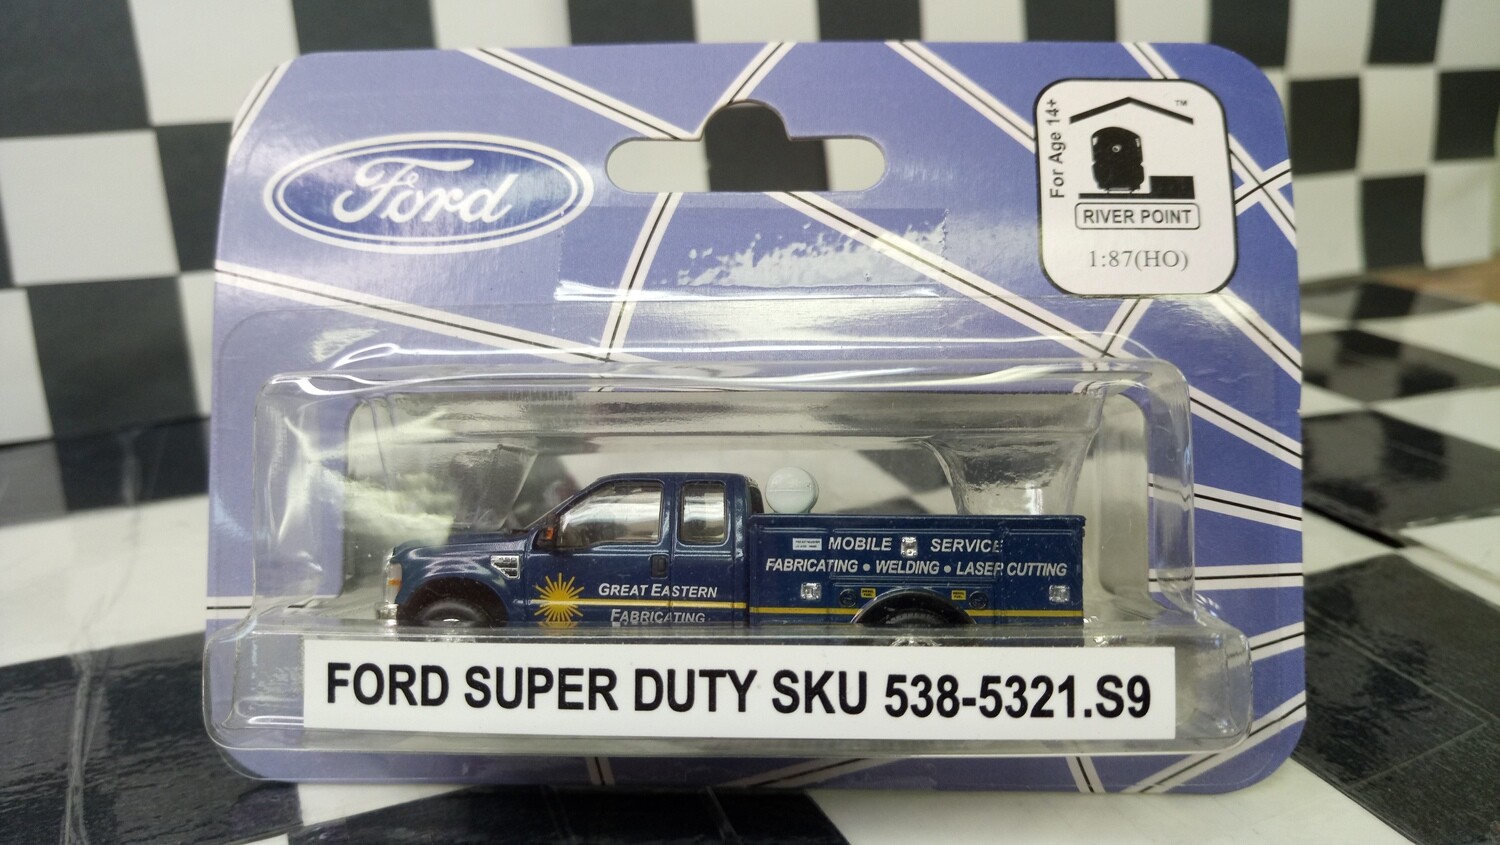 1:87 RPS F-450 XLT DRW Super Cab, Great Eastern Fabrication, Blue with Yellow Stripe